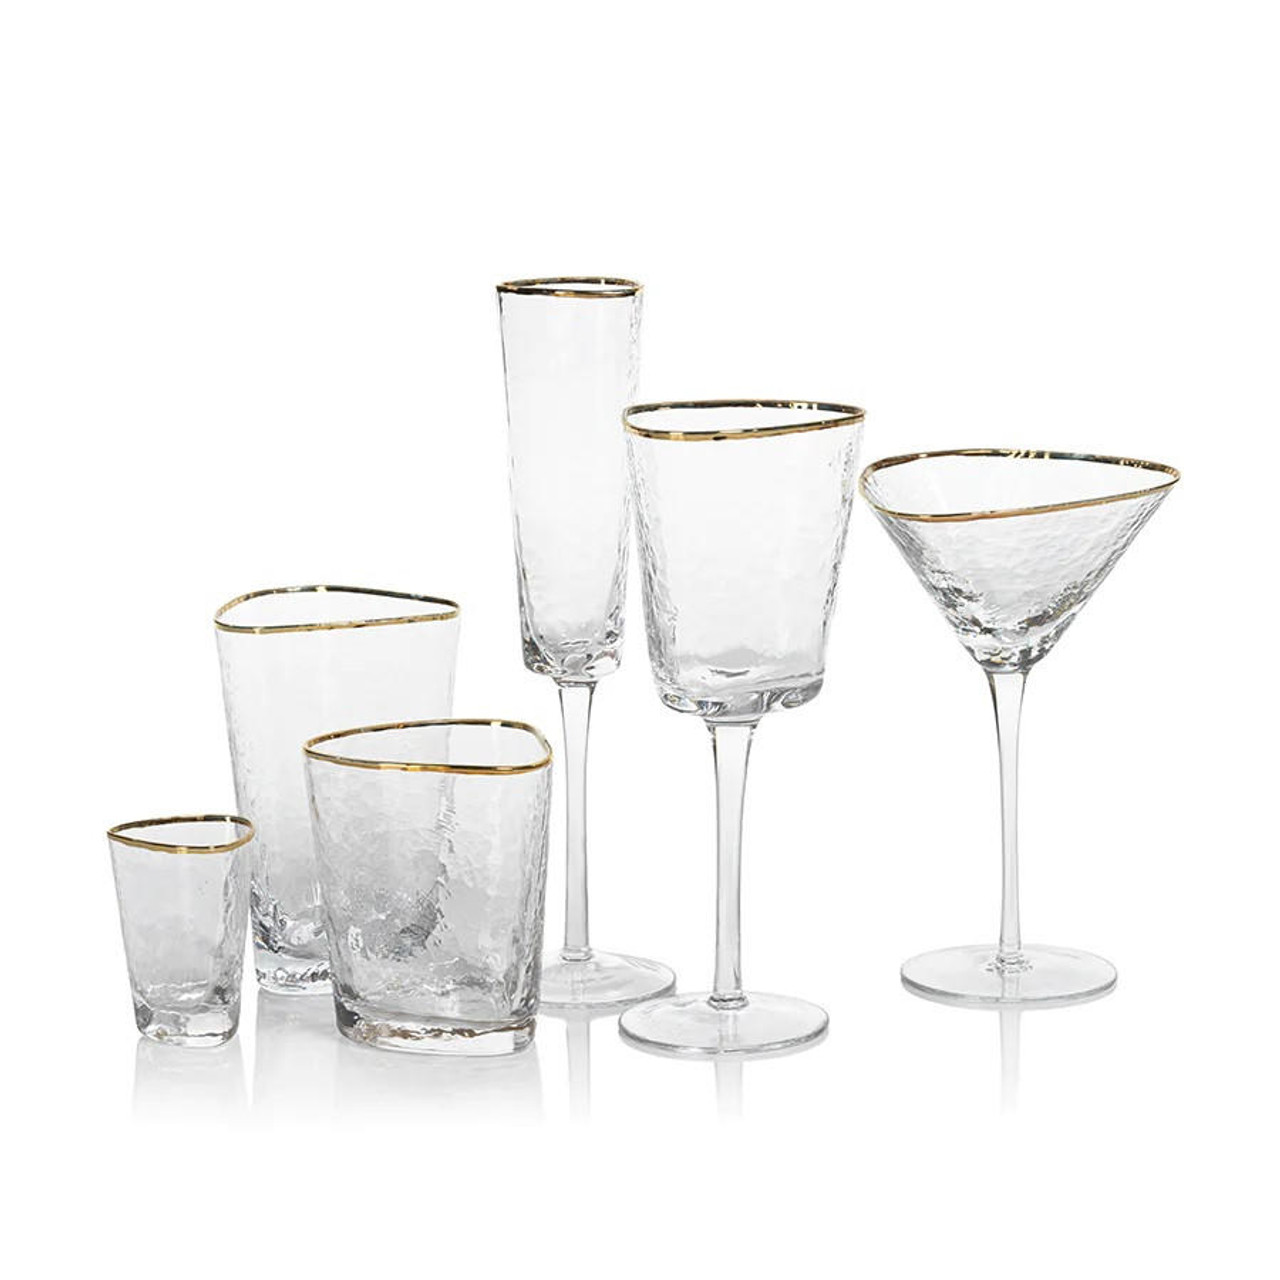 https://cdn11.bigcommerce.com/s-fi9cif0ic4/images/stencil/1280x1280/products/12757/68016/zodax-aperitivo-triangular-champagne-flute-with-gold-rim-set-of-4__84471.1702587046.jpg?c=1